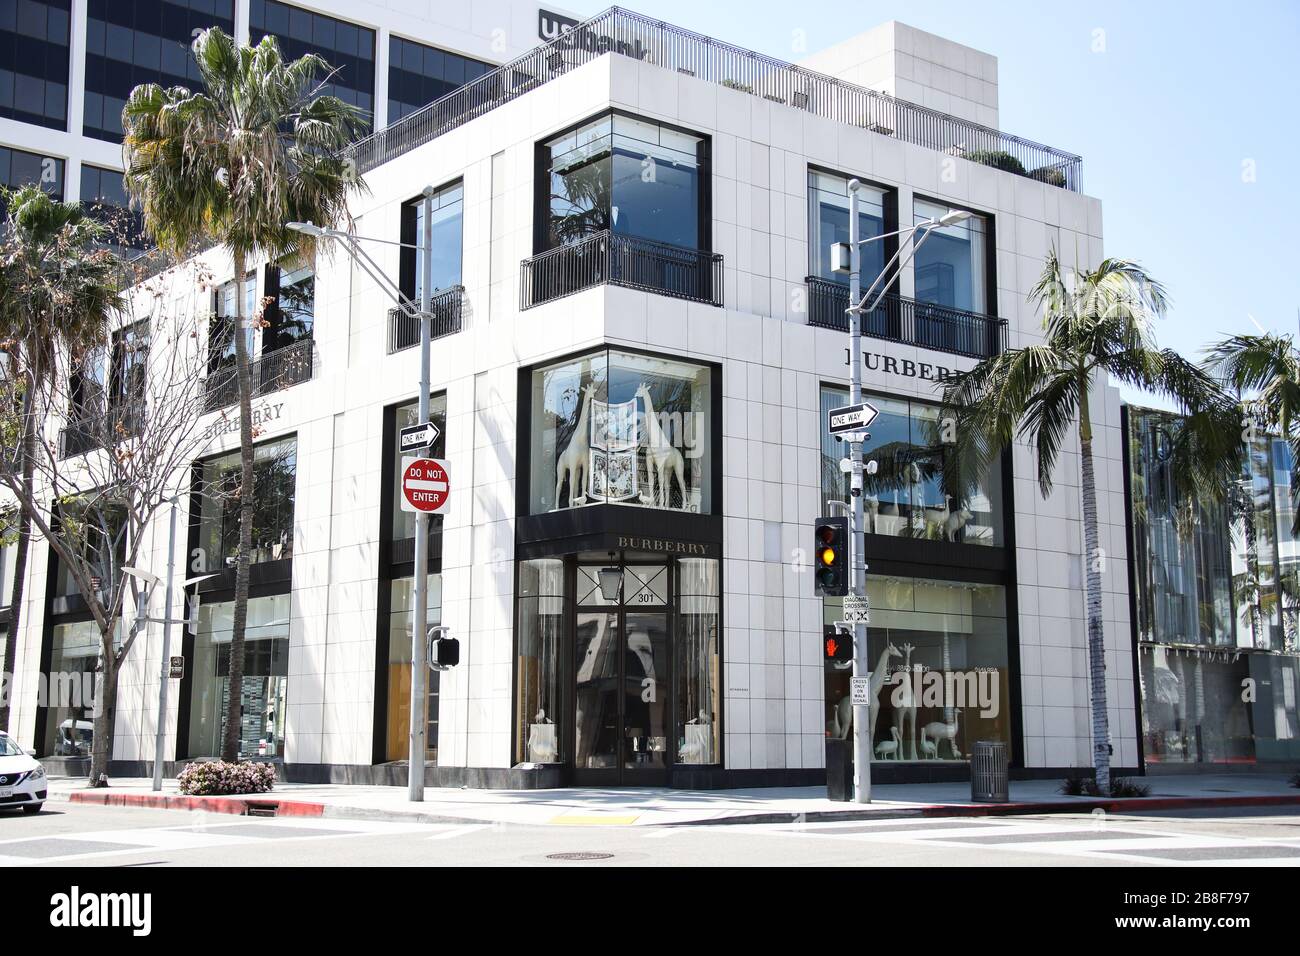 Los Angeles, California, USA. 24th Mar, 2020. A closed Louis Vuitton shop  in Rodeo Drive in Beverly Hills on Tuesday, March 24, 2020. California Gov.  Gavin Newsom issued a statewide stay-at-home order